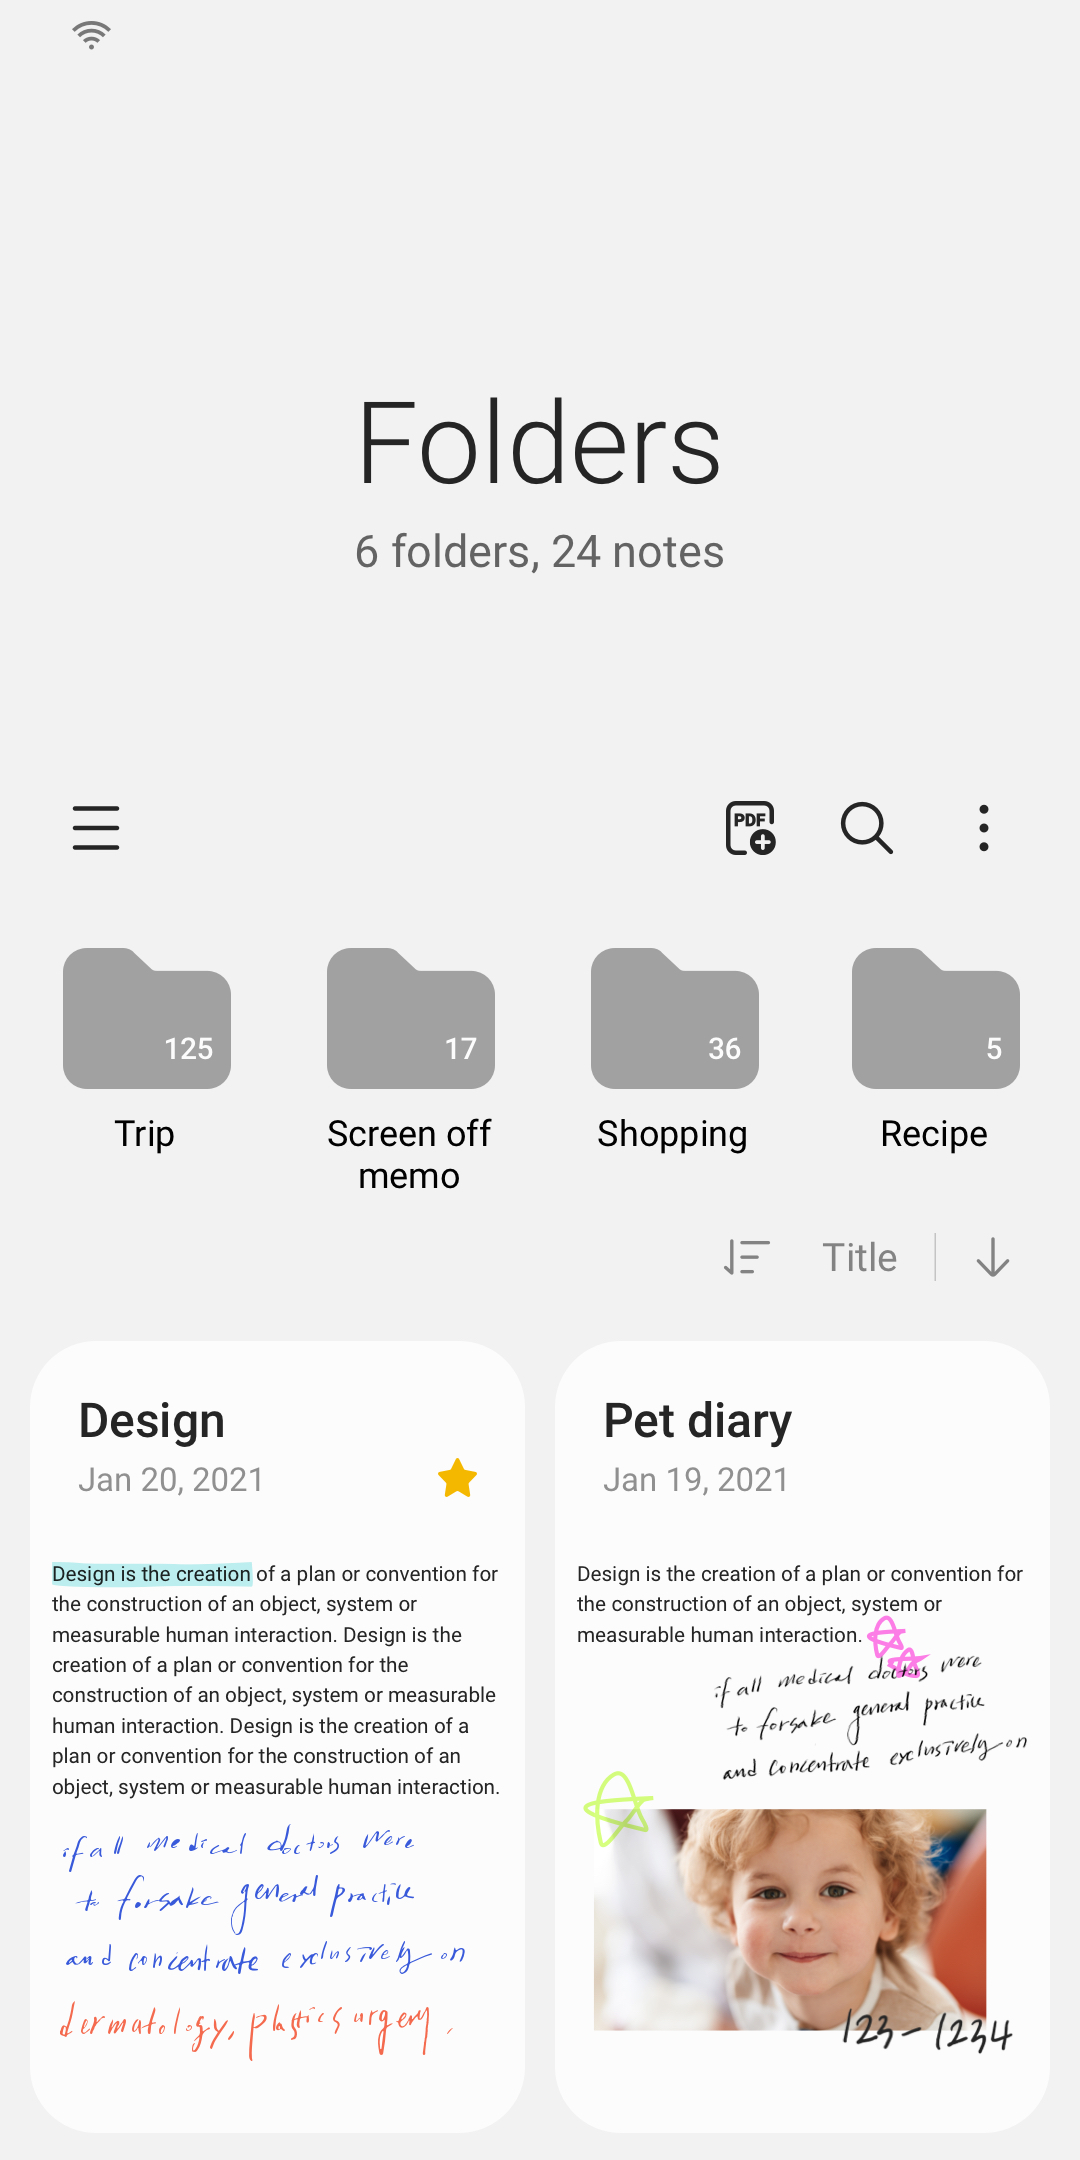 samsung-notes-apk-4-2-01-53-for-android-download-samsung-notes-apk-latest-version-from-apkfab